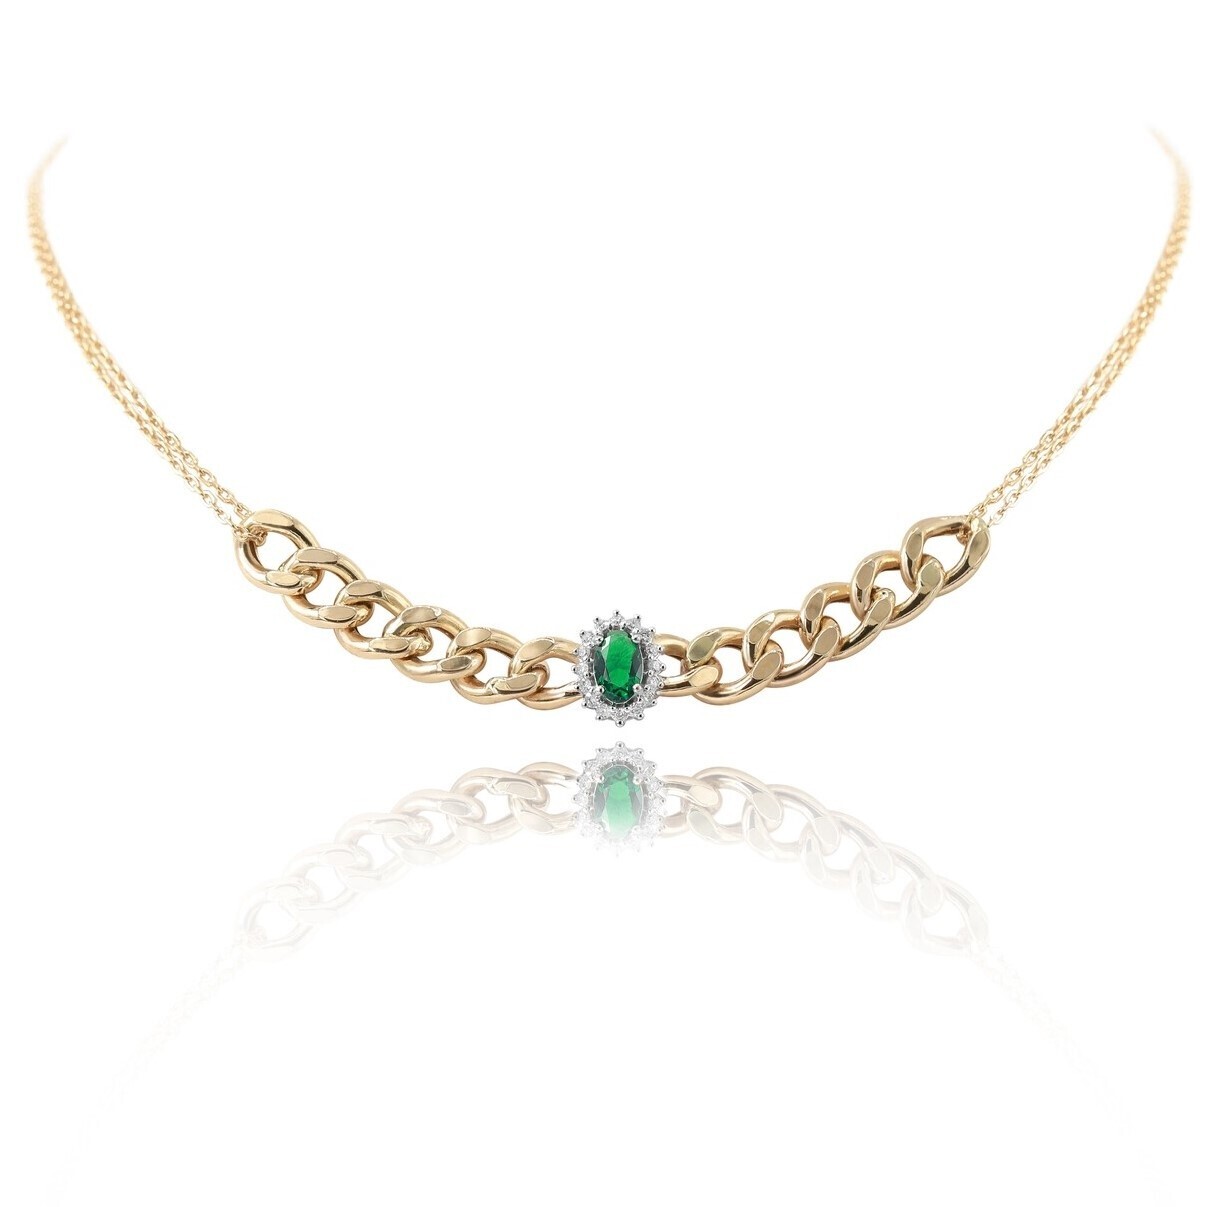 Eternal Diamond Chain Necklace with Colored Stone